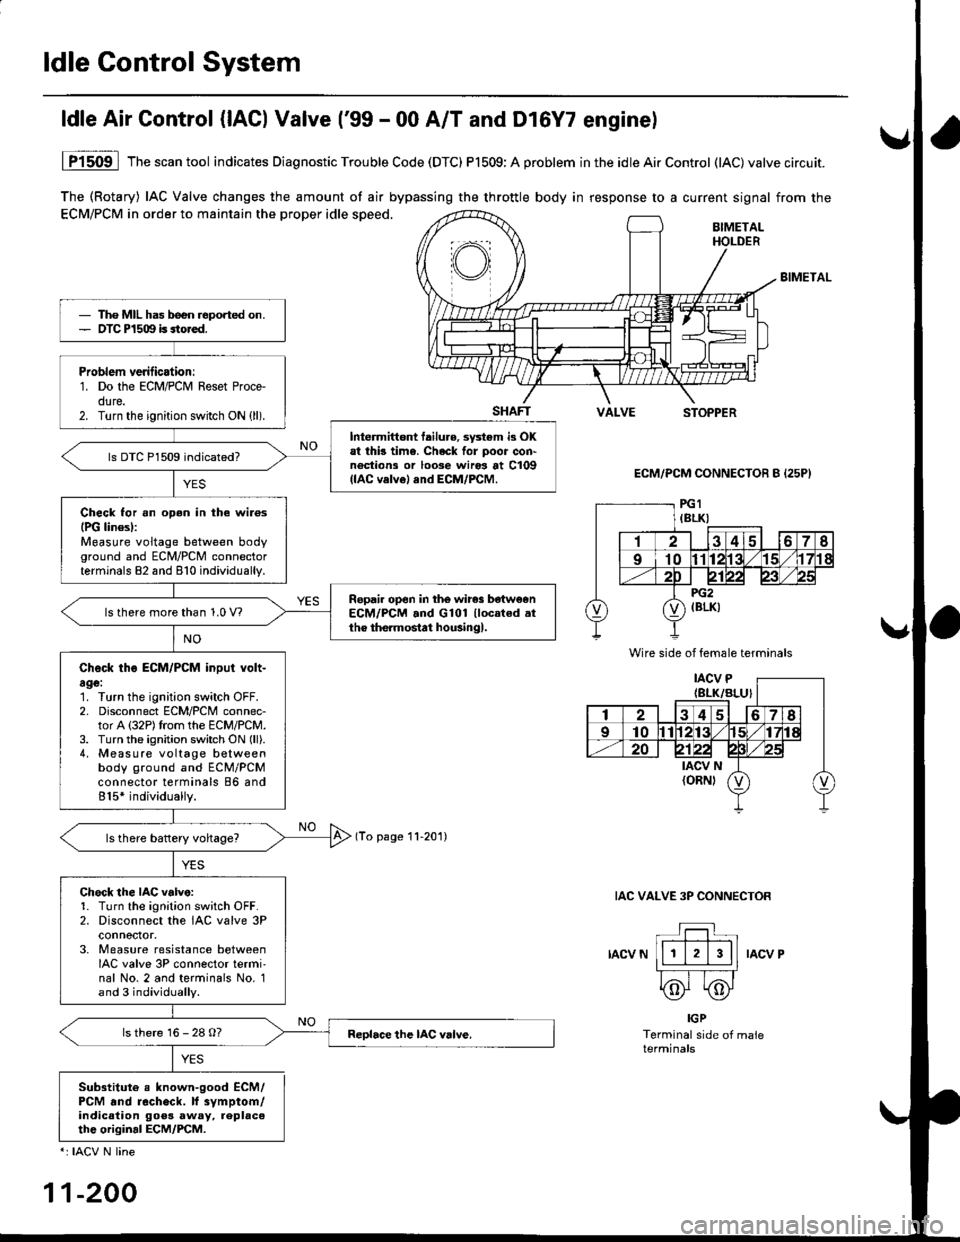 HONDA CIVIC 1999 6.G Workshop Manual ldle Gontrol System
The (Rotary) IAC Valve changes the amount of air bypassing the throttle body in response to a current signal from the
ECM/PCM in order to maintain the proper idle speed.BIMETALHOLD